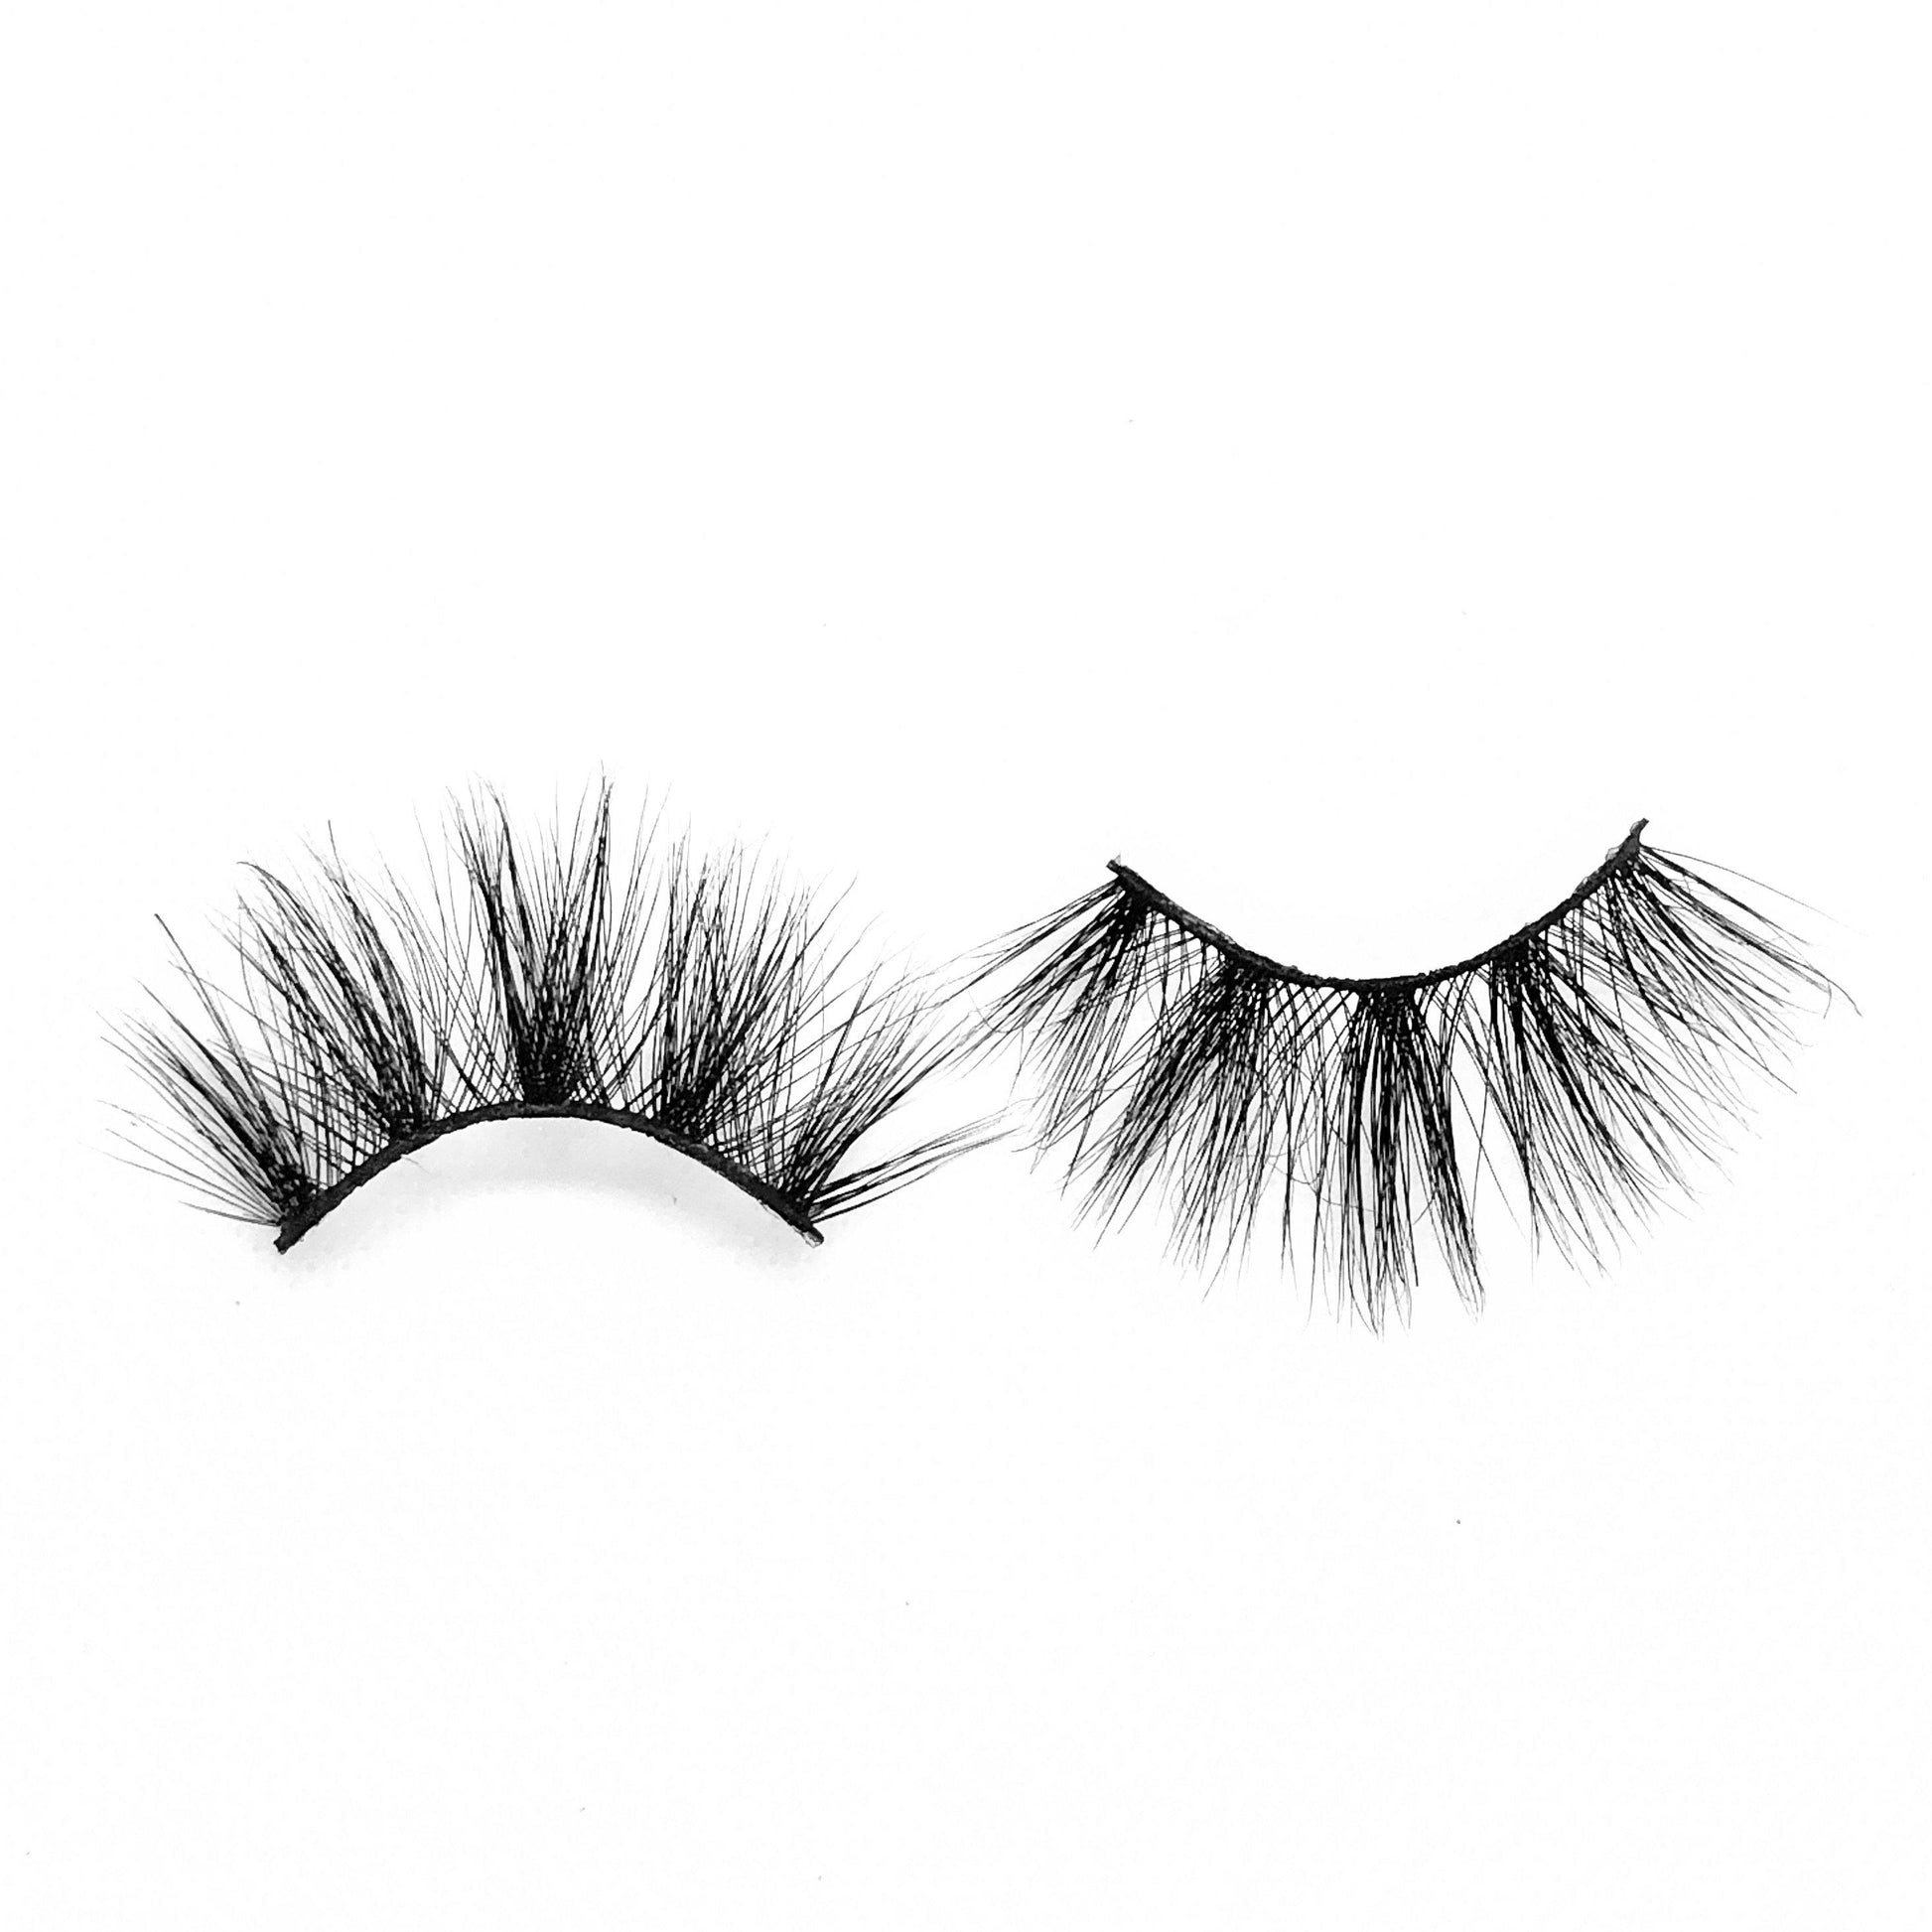 Cardi-Mega Volume-"Cardi” is the more dramatic, longer version of our “Serenity” lashes. These long, 25mm, 5D mink lashes give a dramatic wispy look. Super cute, girly, and flirty. These lashes can be styled for so many different occasions. Also available in our "Alpha Femme (3-Pack)." Try our "Serenity" lashes for a shorter look! Description Handmade, Cruelty-Free, Wear up to 30x Material: 100% Mink Band: Black Cotton Band Volume: Mega Volume Style: Dramatic, X-Long, Wispy, Open-eye To Use: Mea